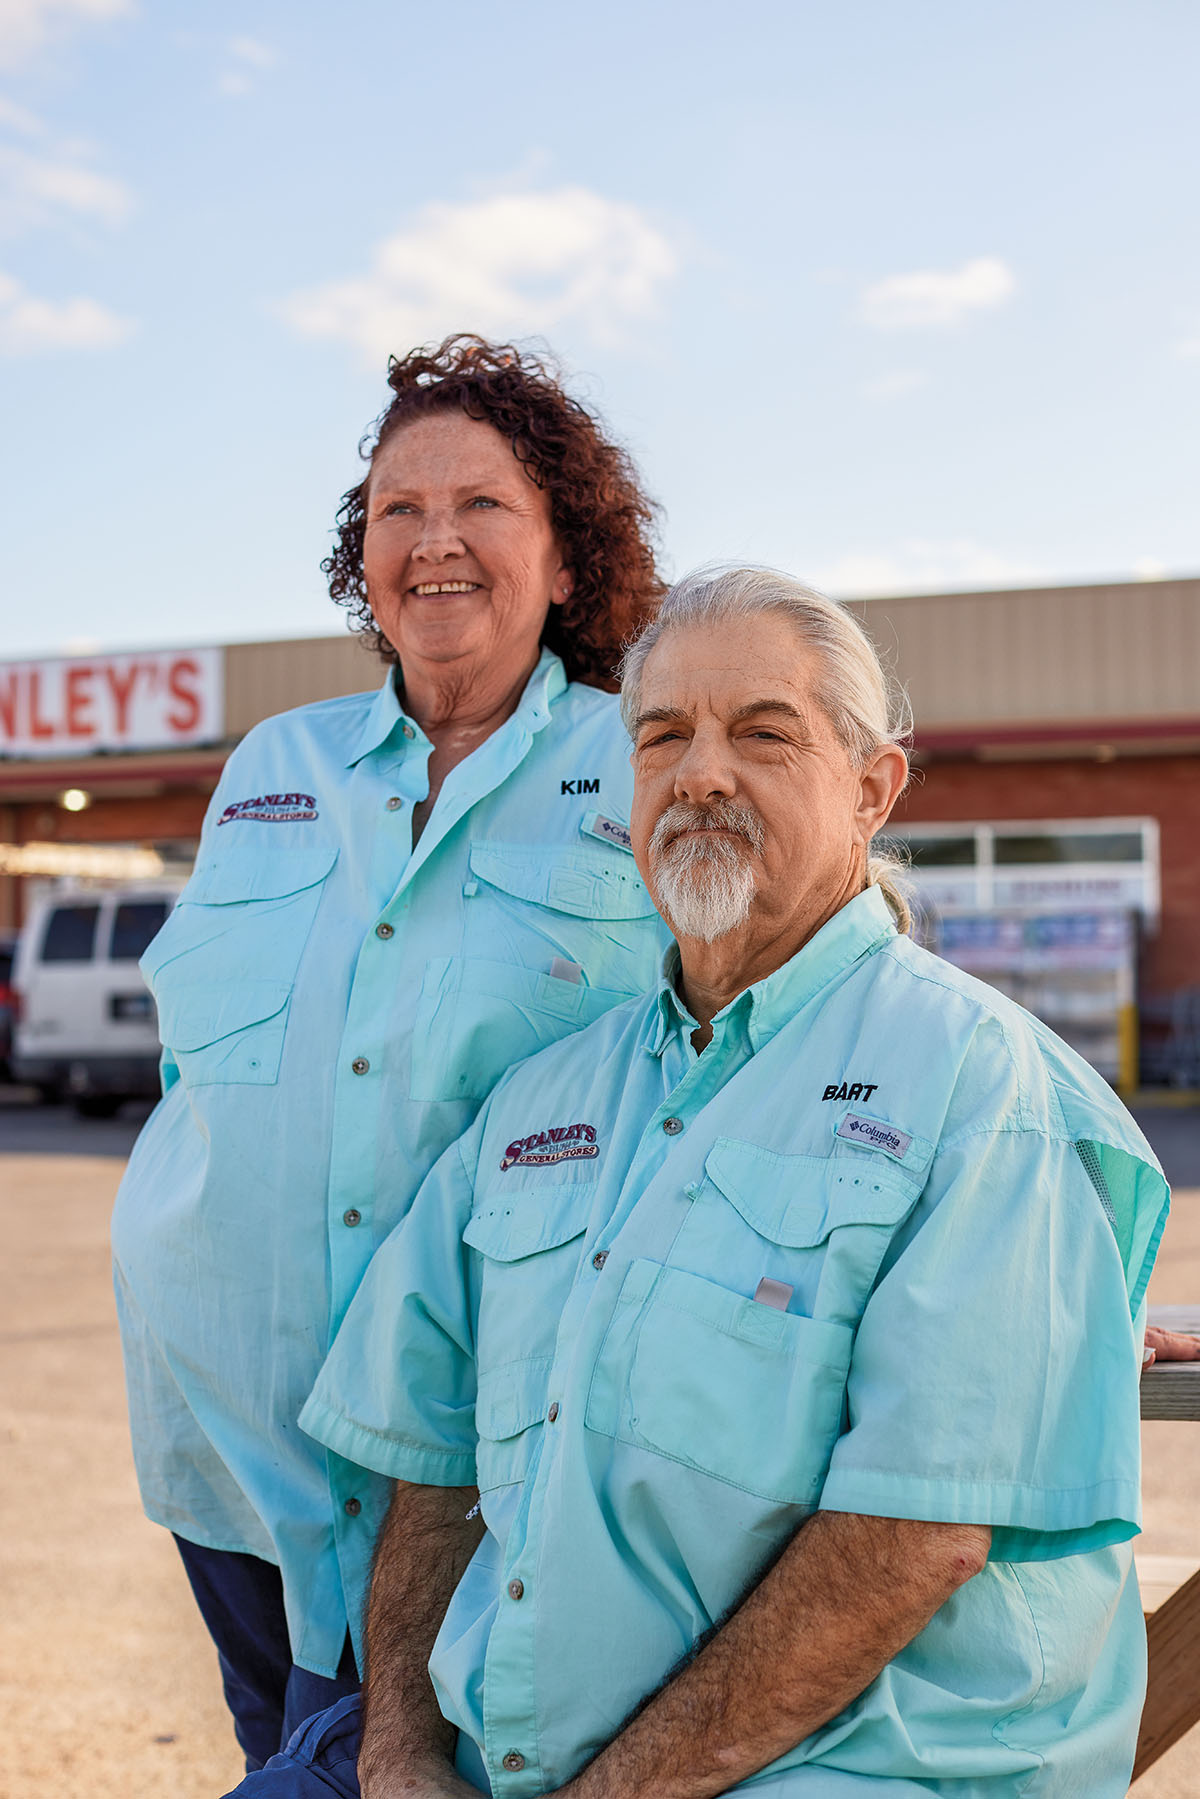 Two people in pale blue shirts stand in front of a store with a sign reading "Stanley's"